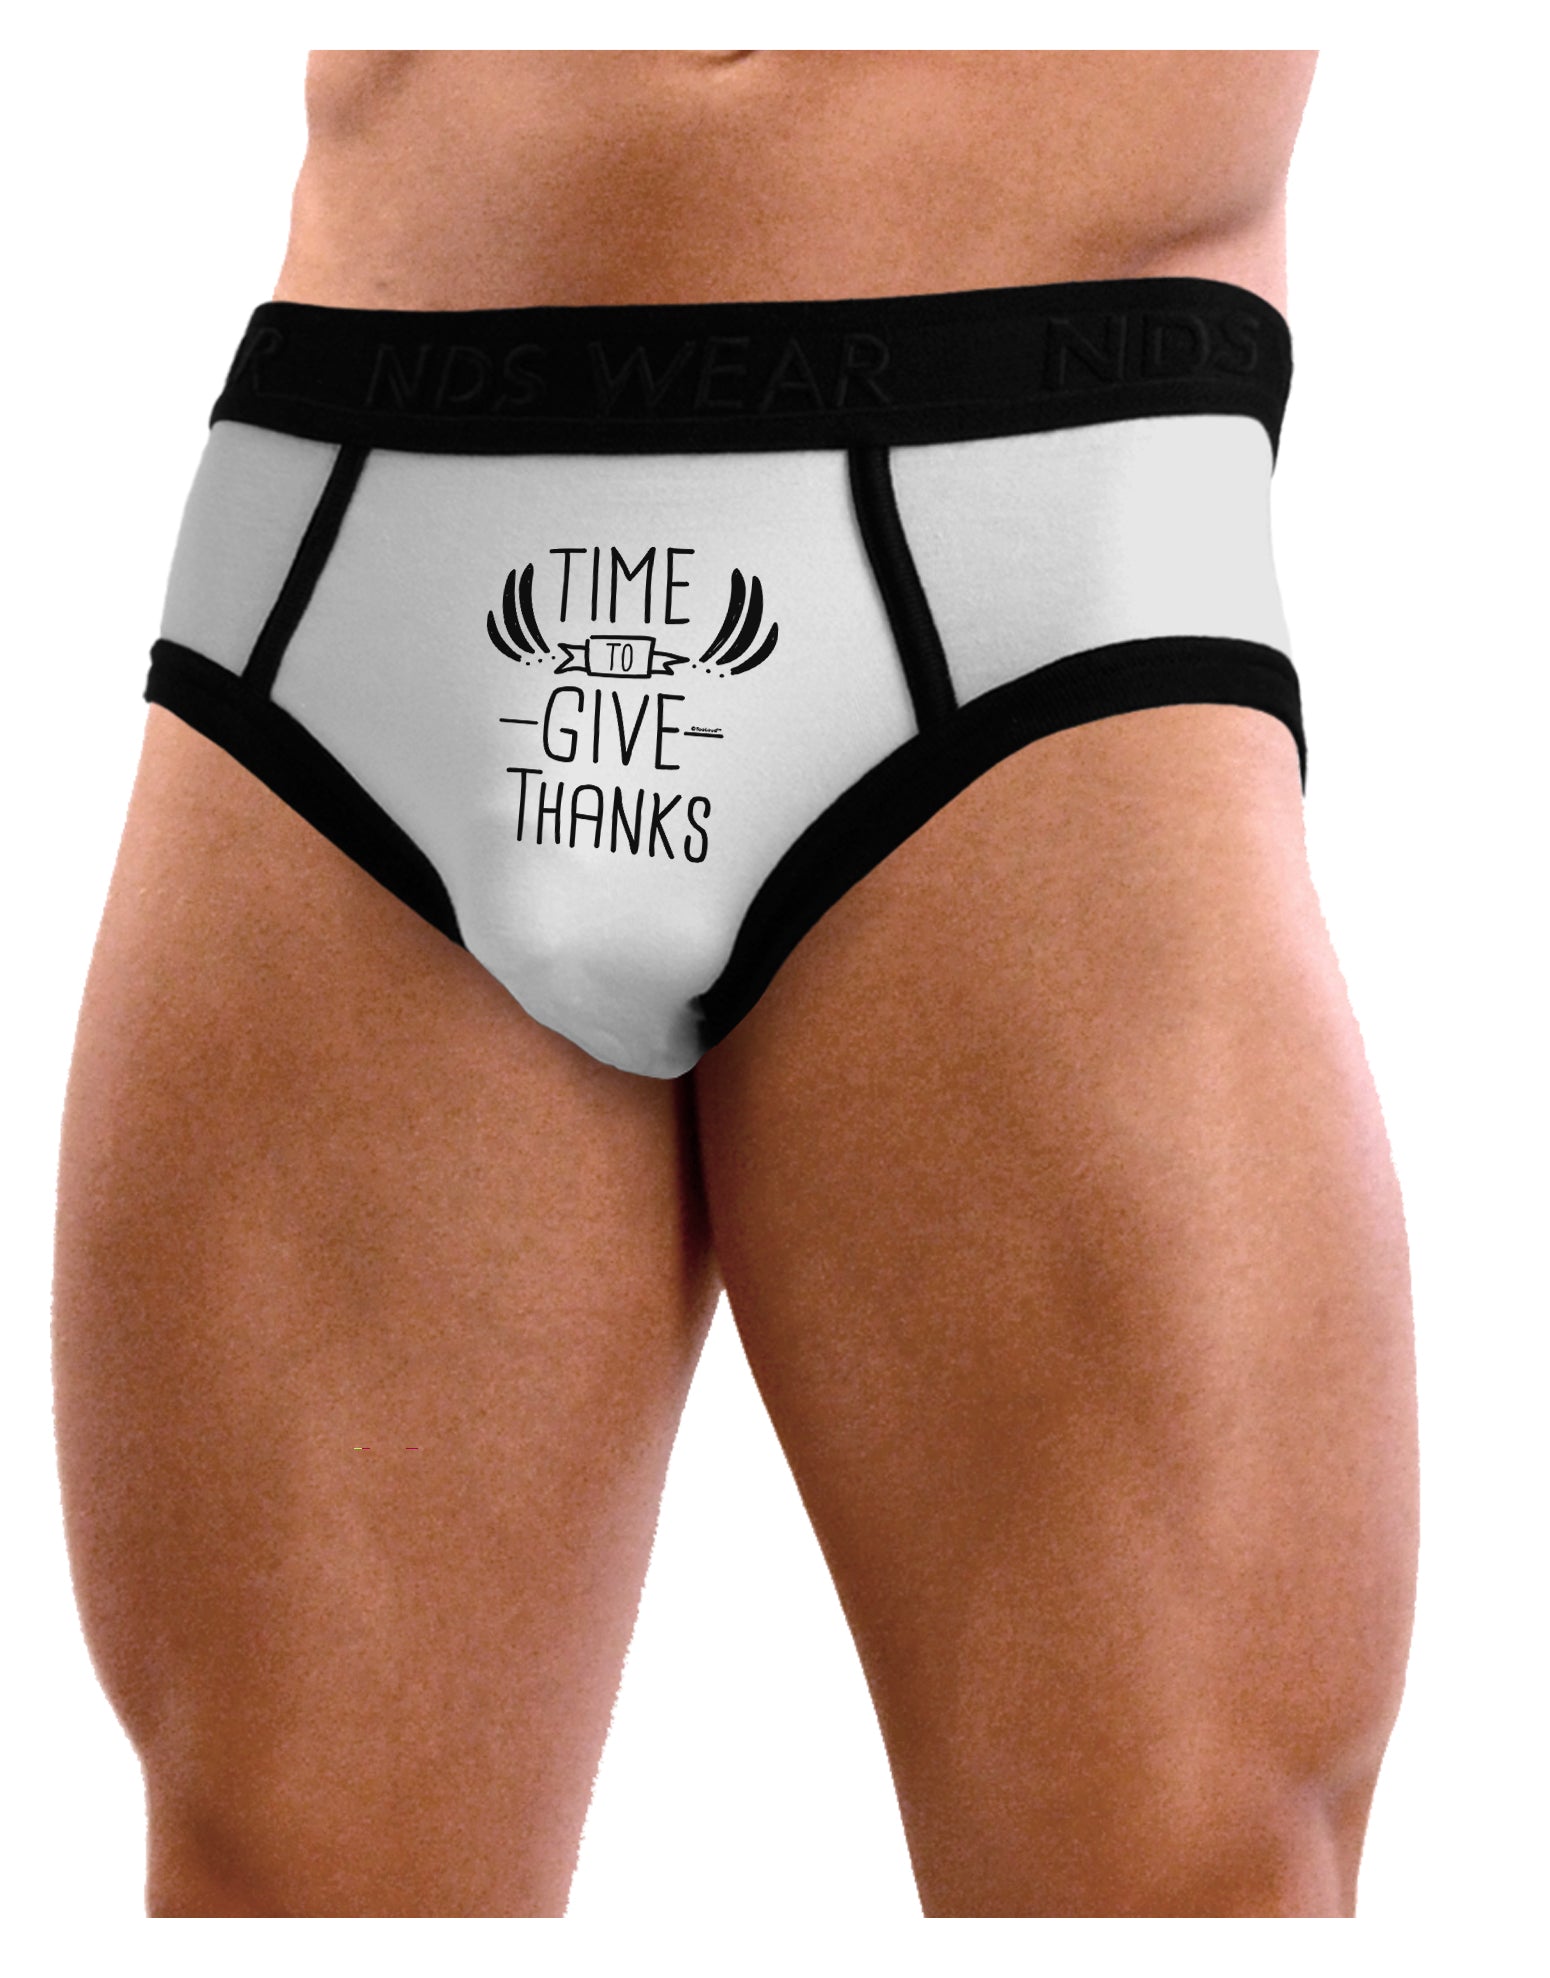 Time to Give Thanks Mens NDS Wear Briefs Underwear